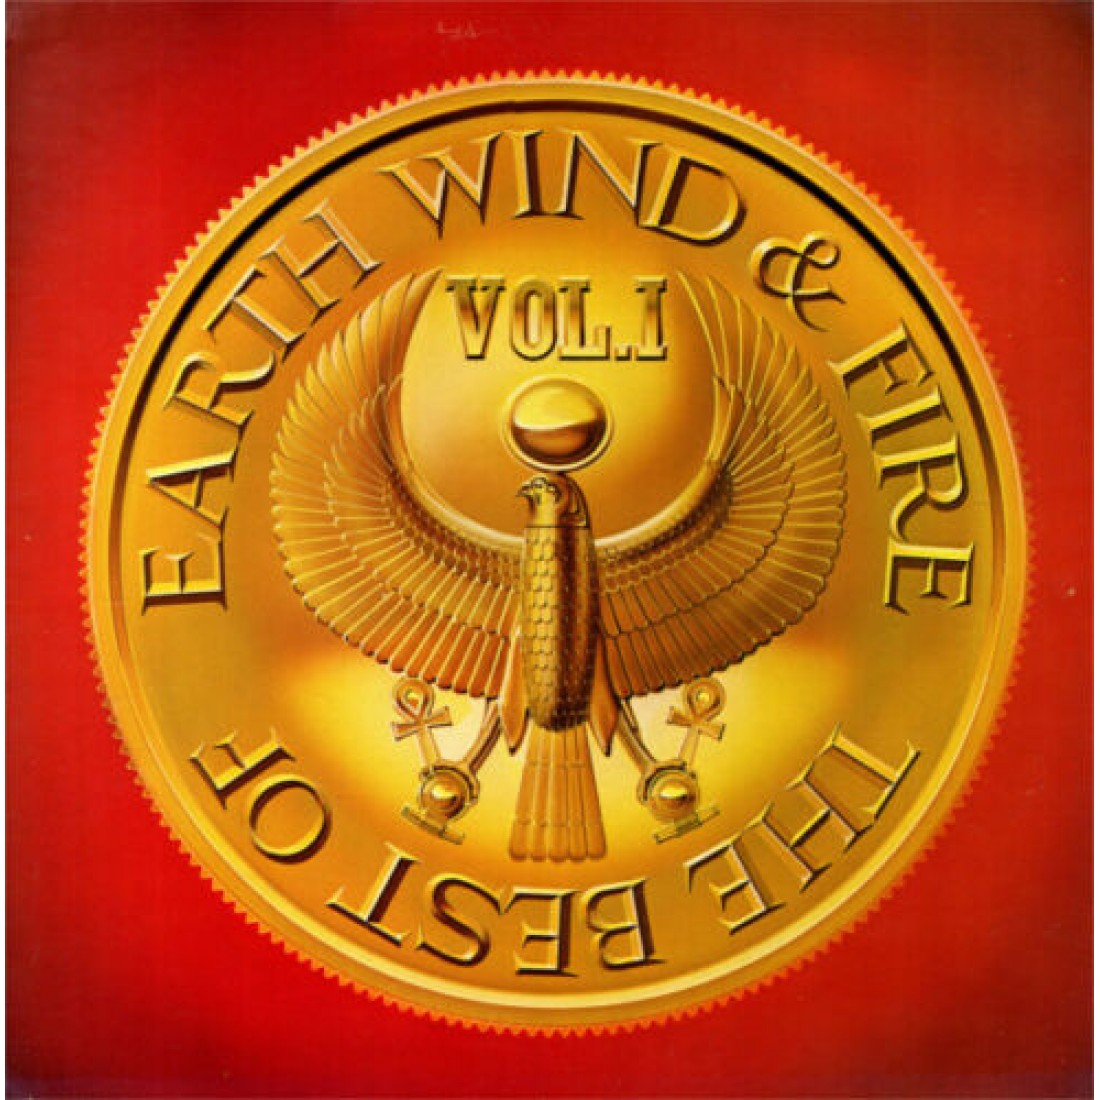 Earth wind & fire Greatest Hits Vol1 (1978) 3